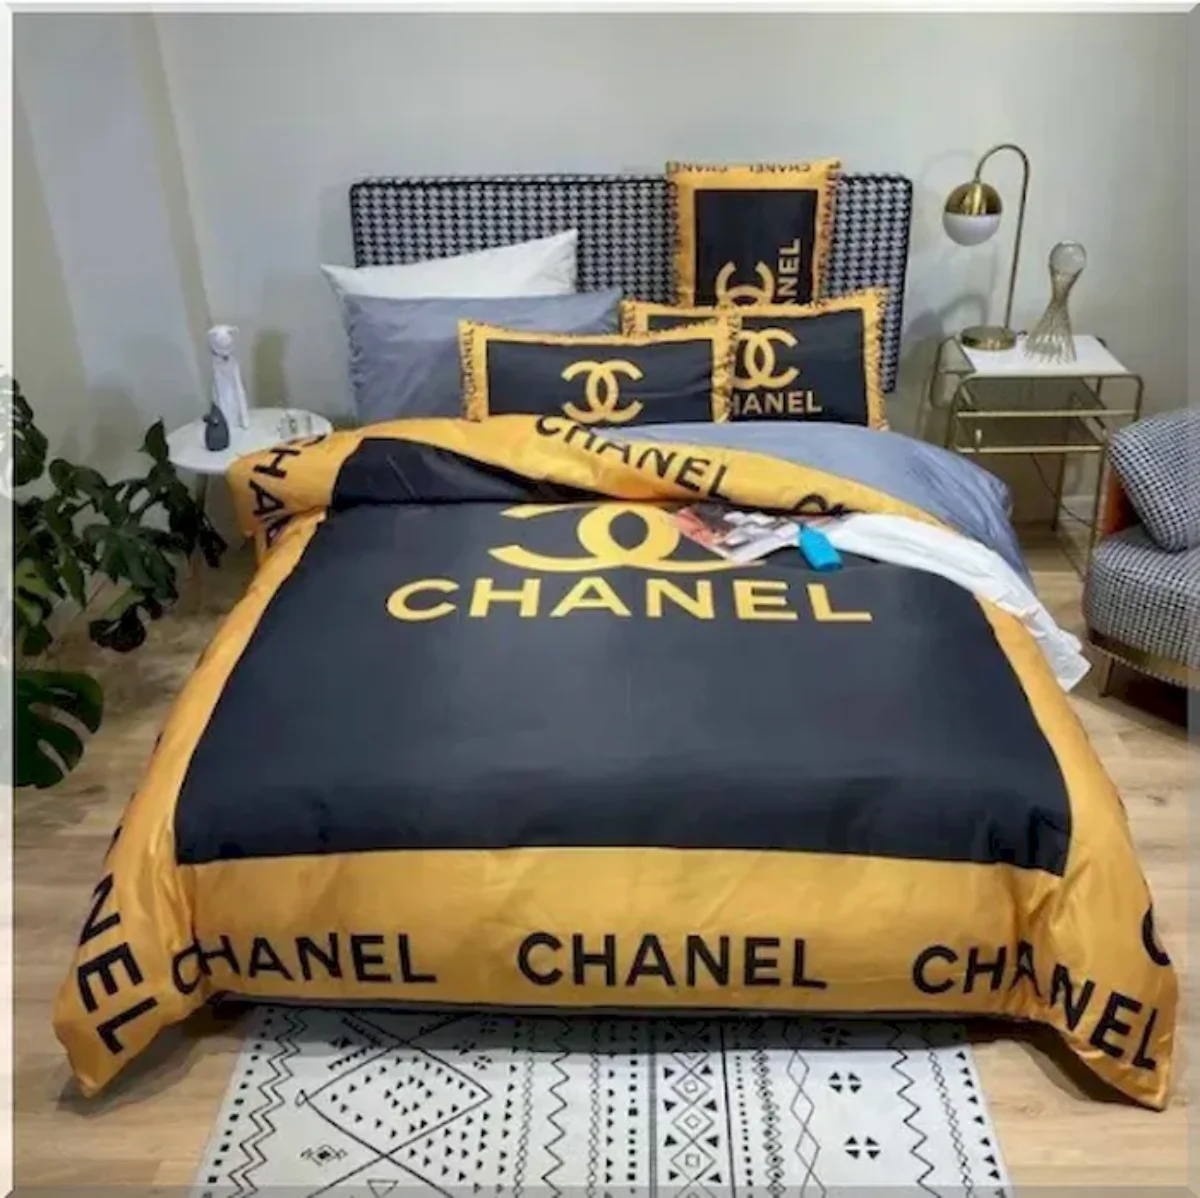 Chanel Bedding Set Black And Gold - Peto Rugs